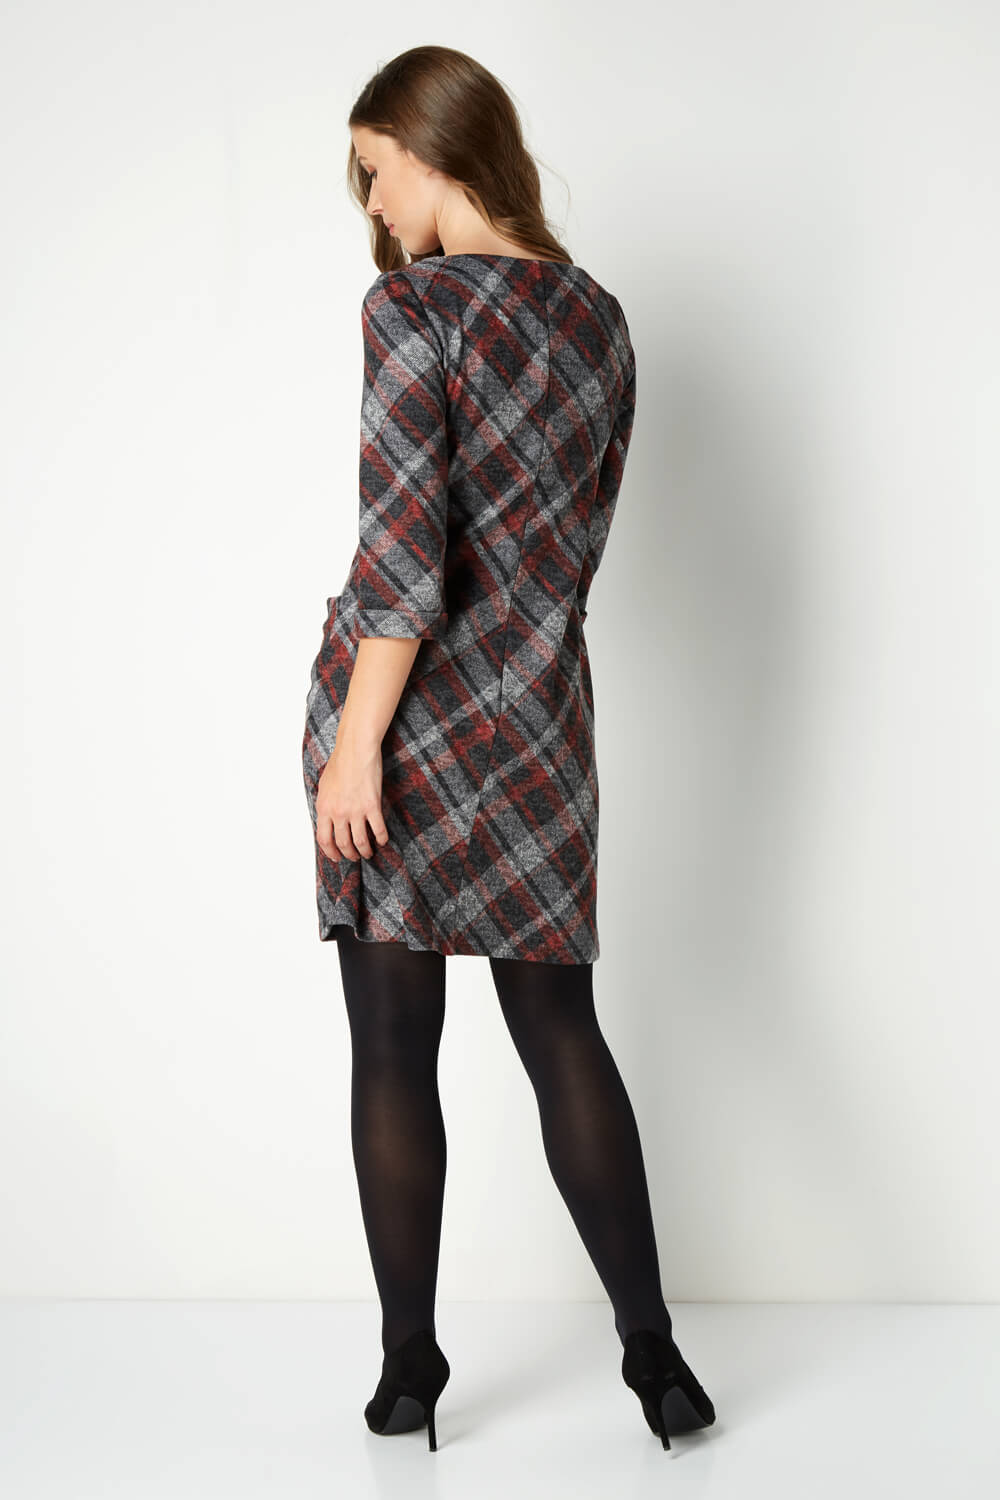 Red Check Print 3/4 Sleeve Shift Dress, Image 2 of 4